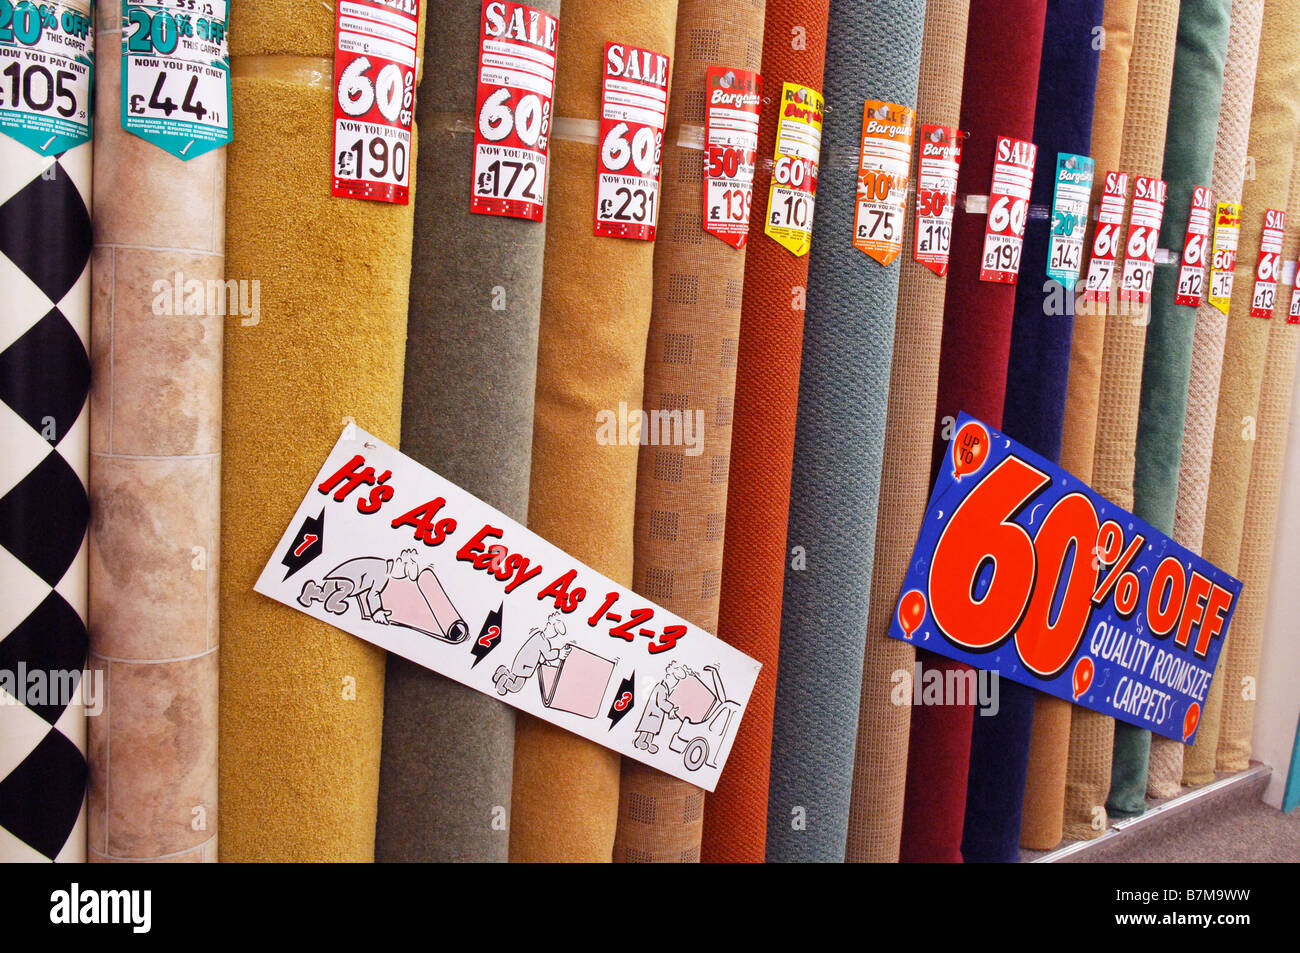 Rolls of different discount carpets for sale in Carpet Right, some with up  to 60% off with the sign "It's as easy as 1-2-3 Stock Photo - Alamy